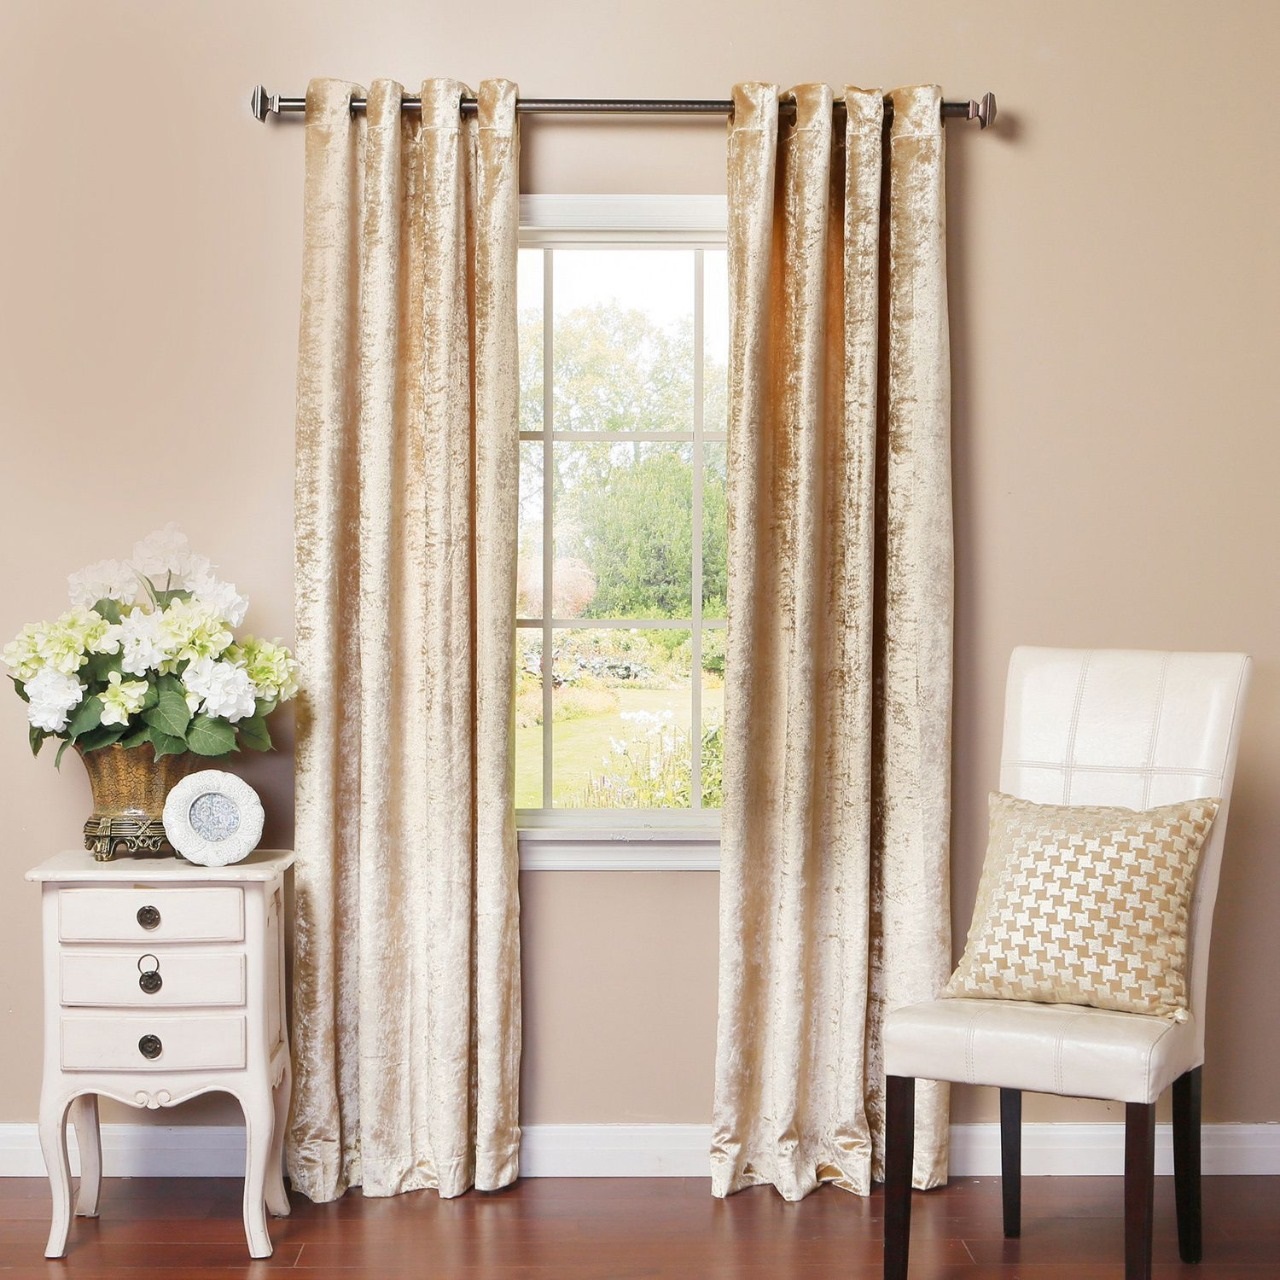 Tips to take care of Velvet Curtains